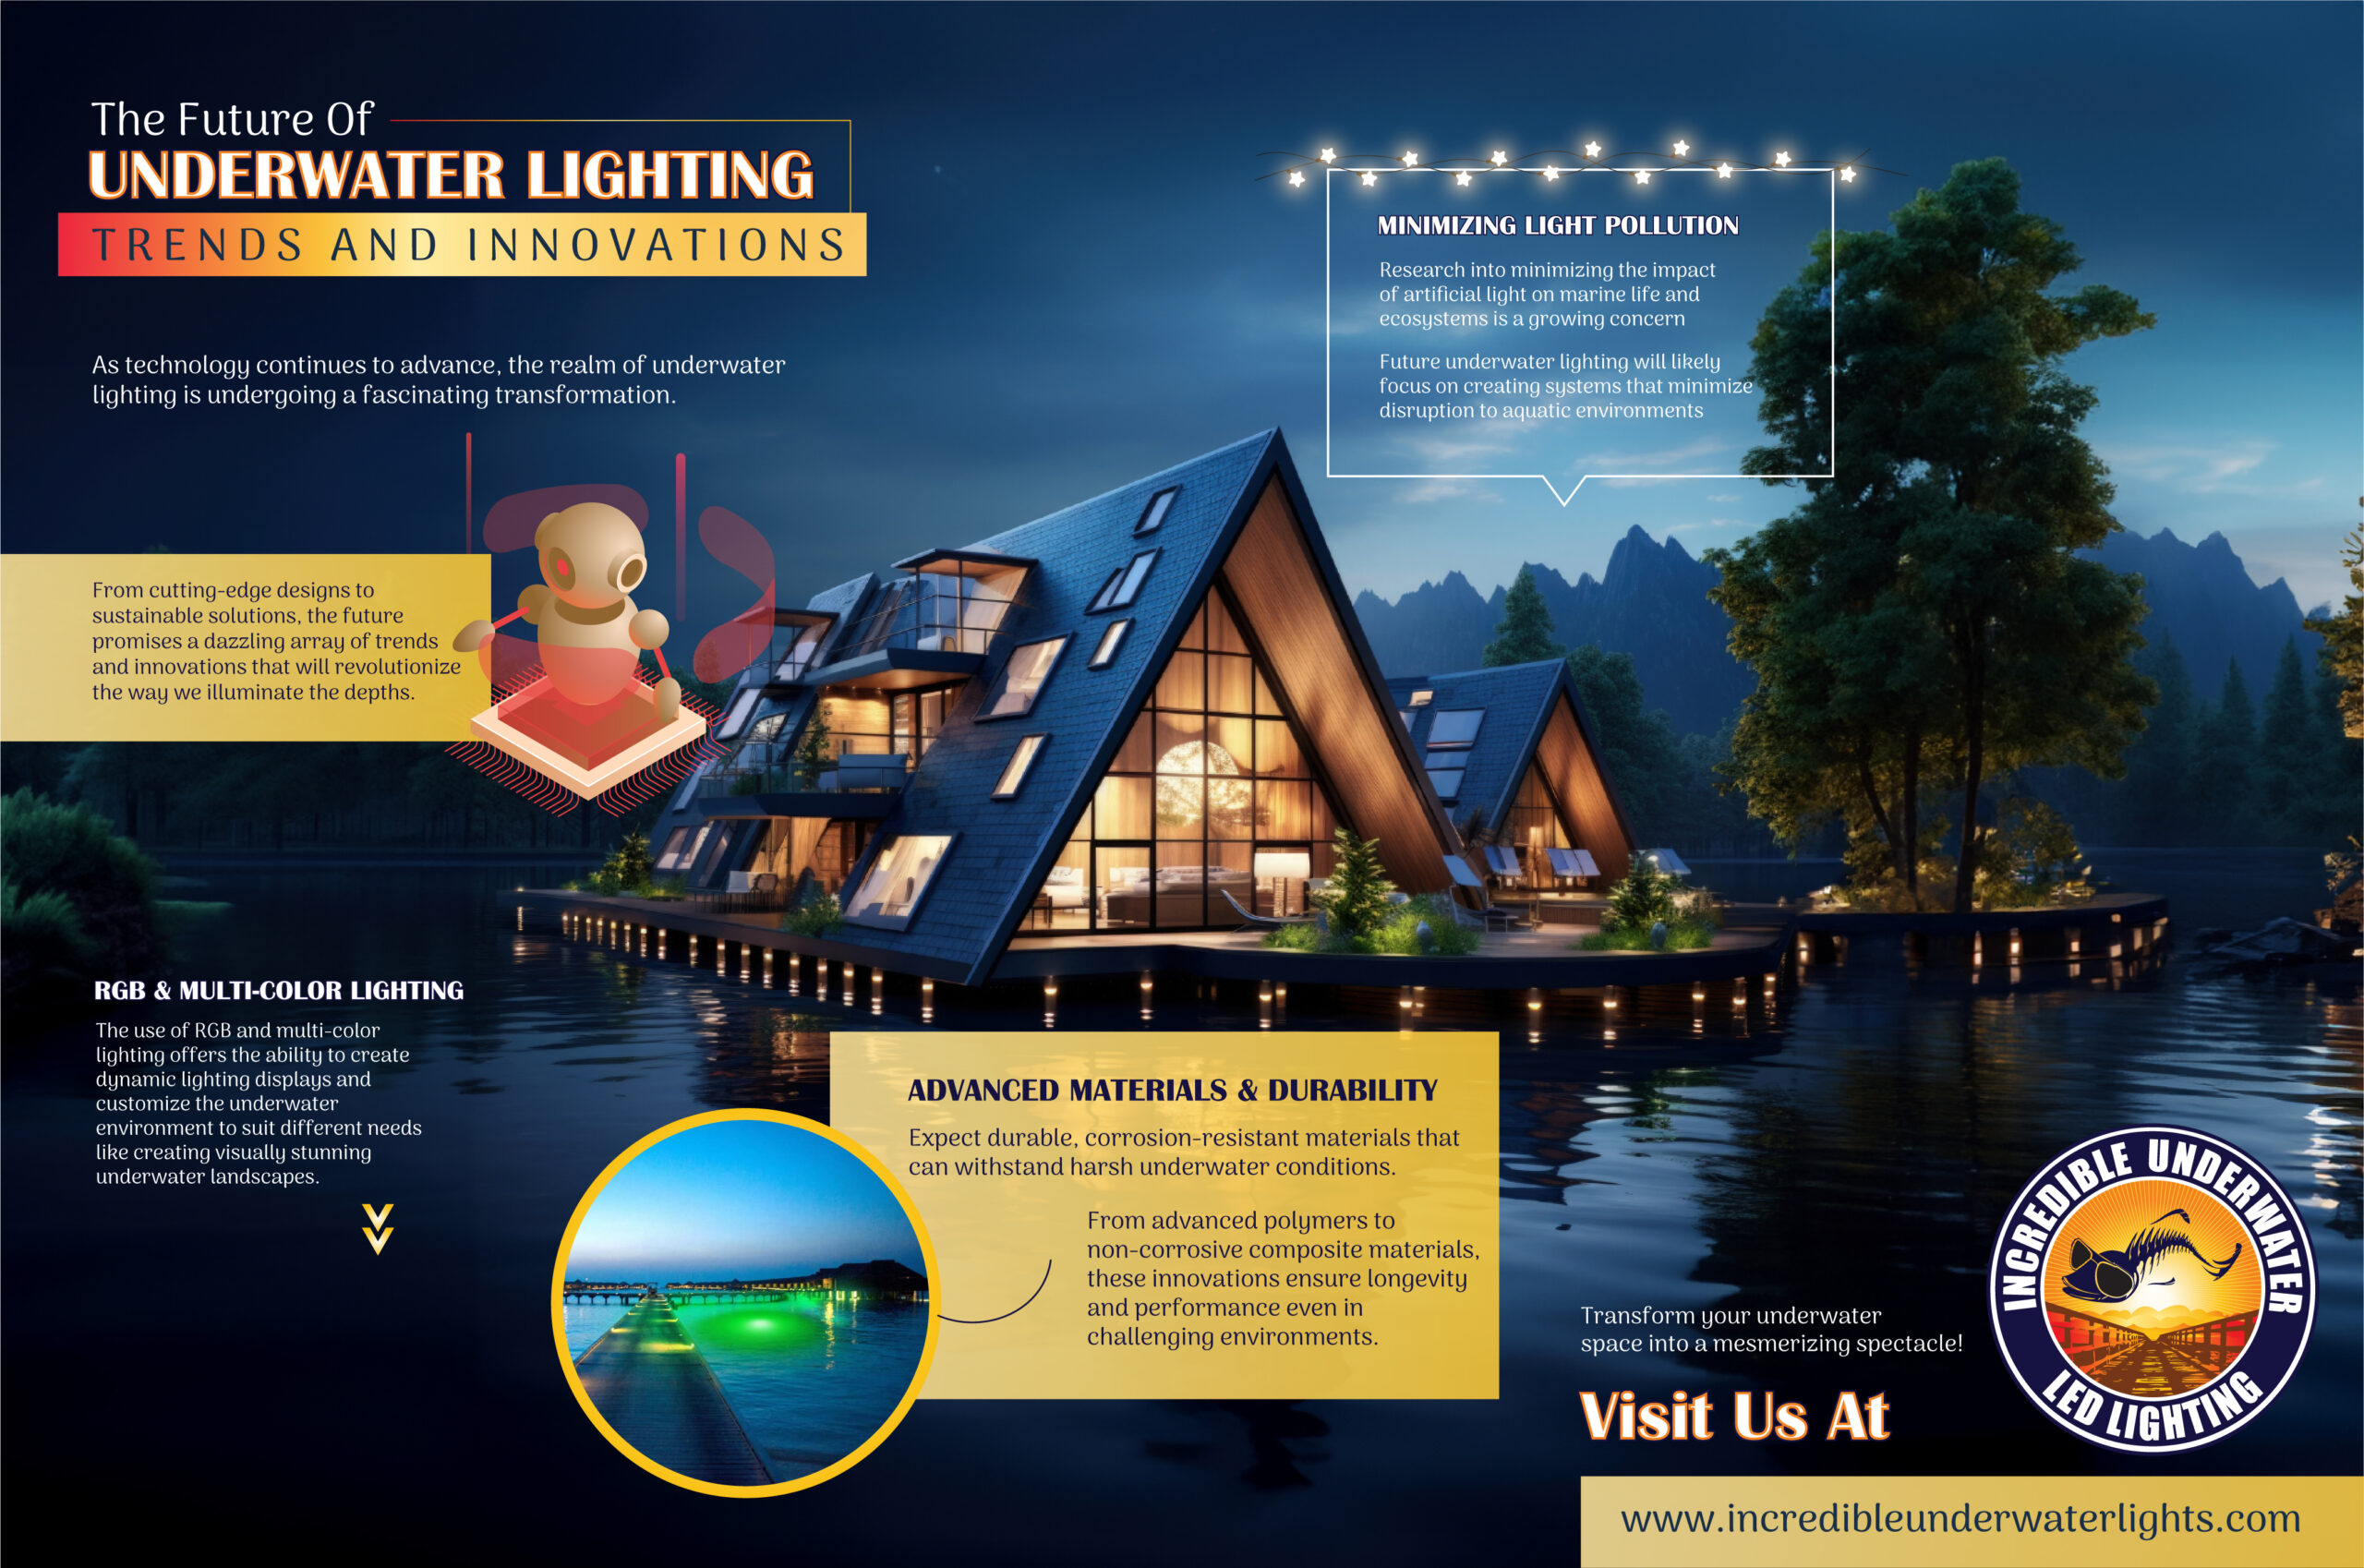 The Future of Underwater Lighting: Trends and Innovations